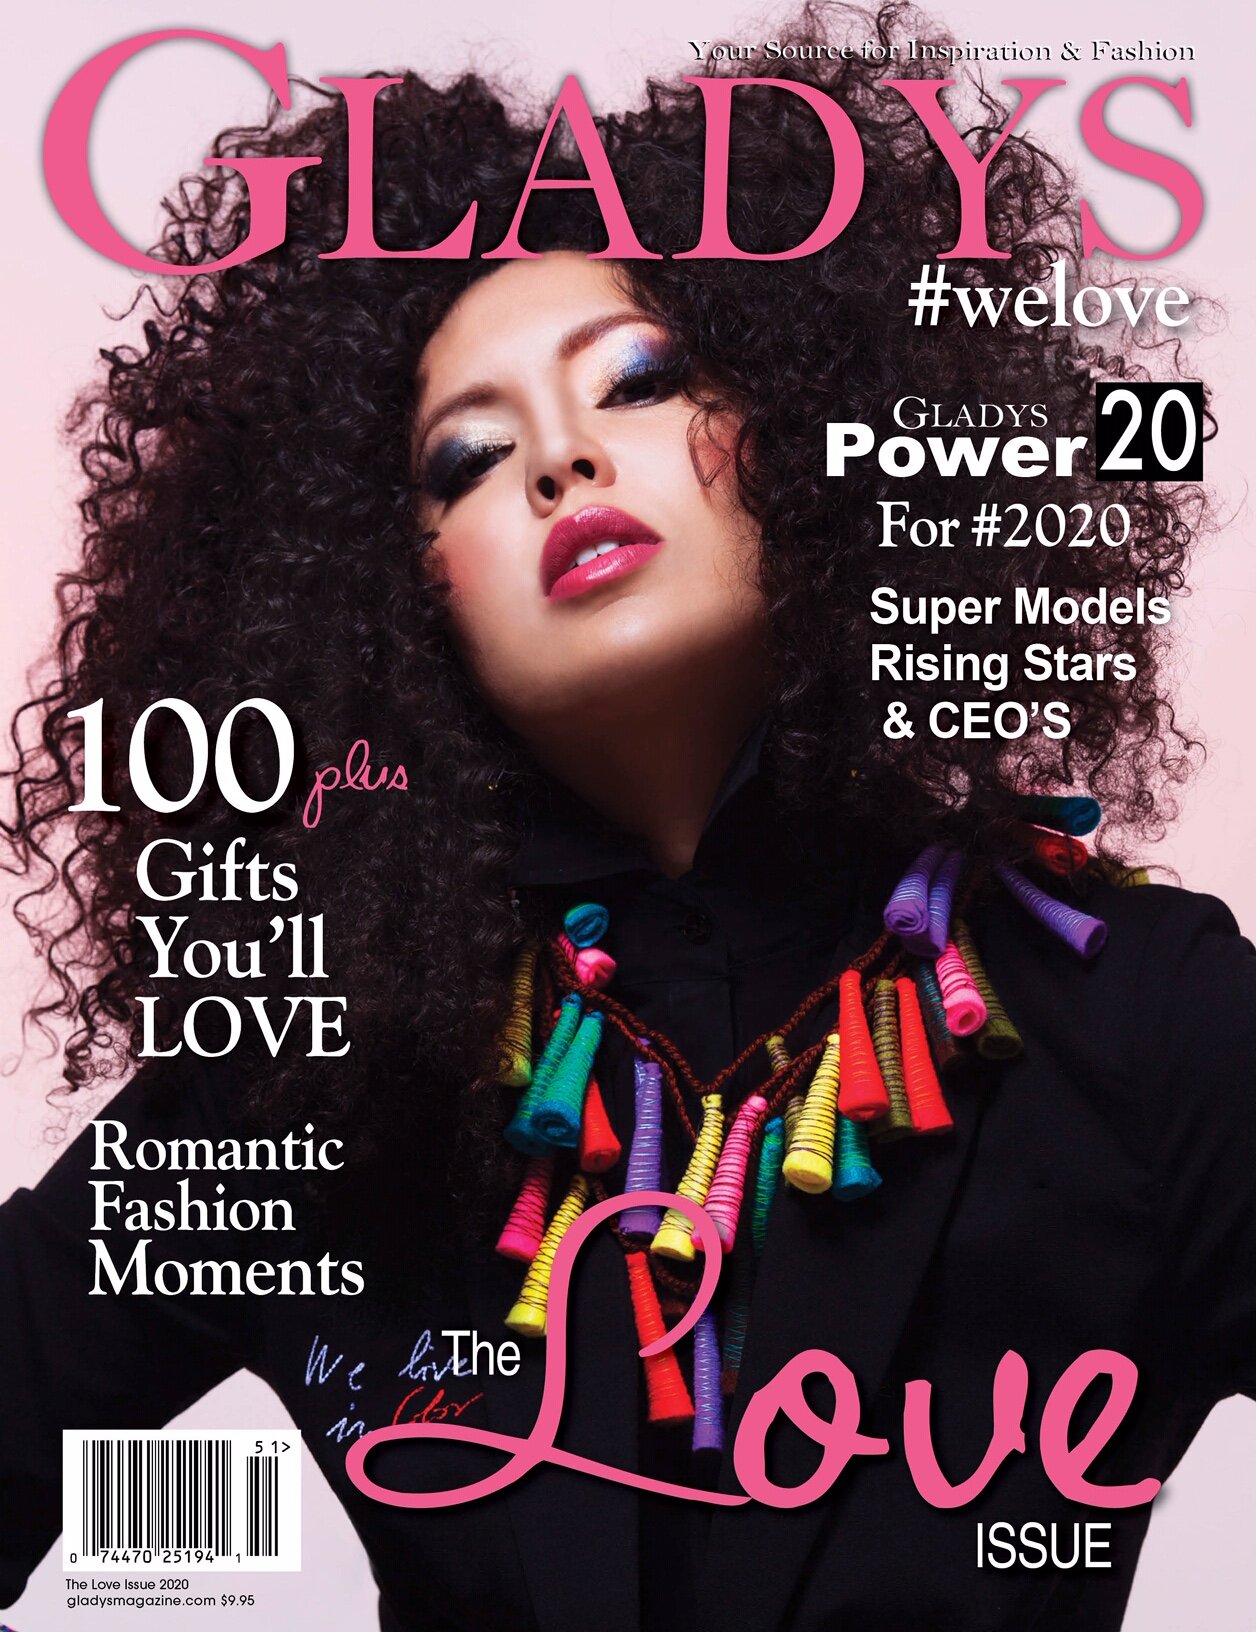 Gladys Love20 Front Cover.jpg